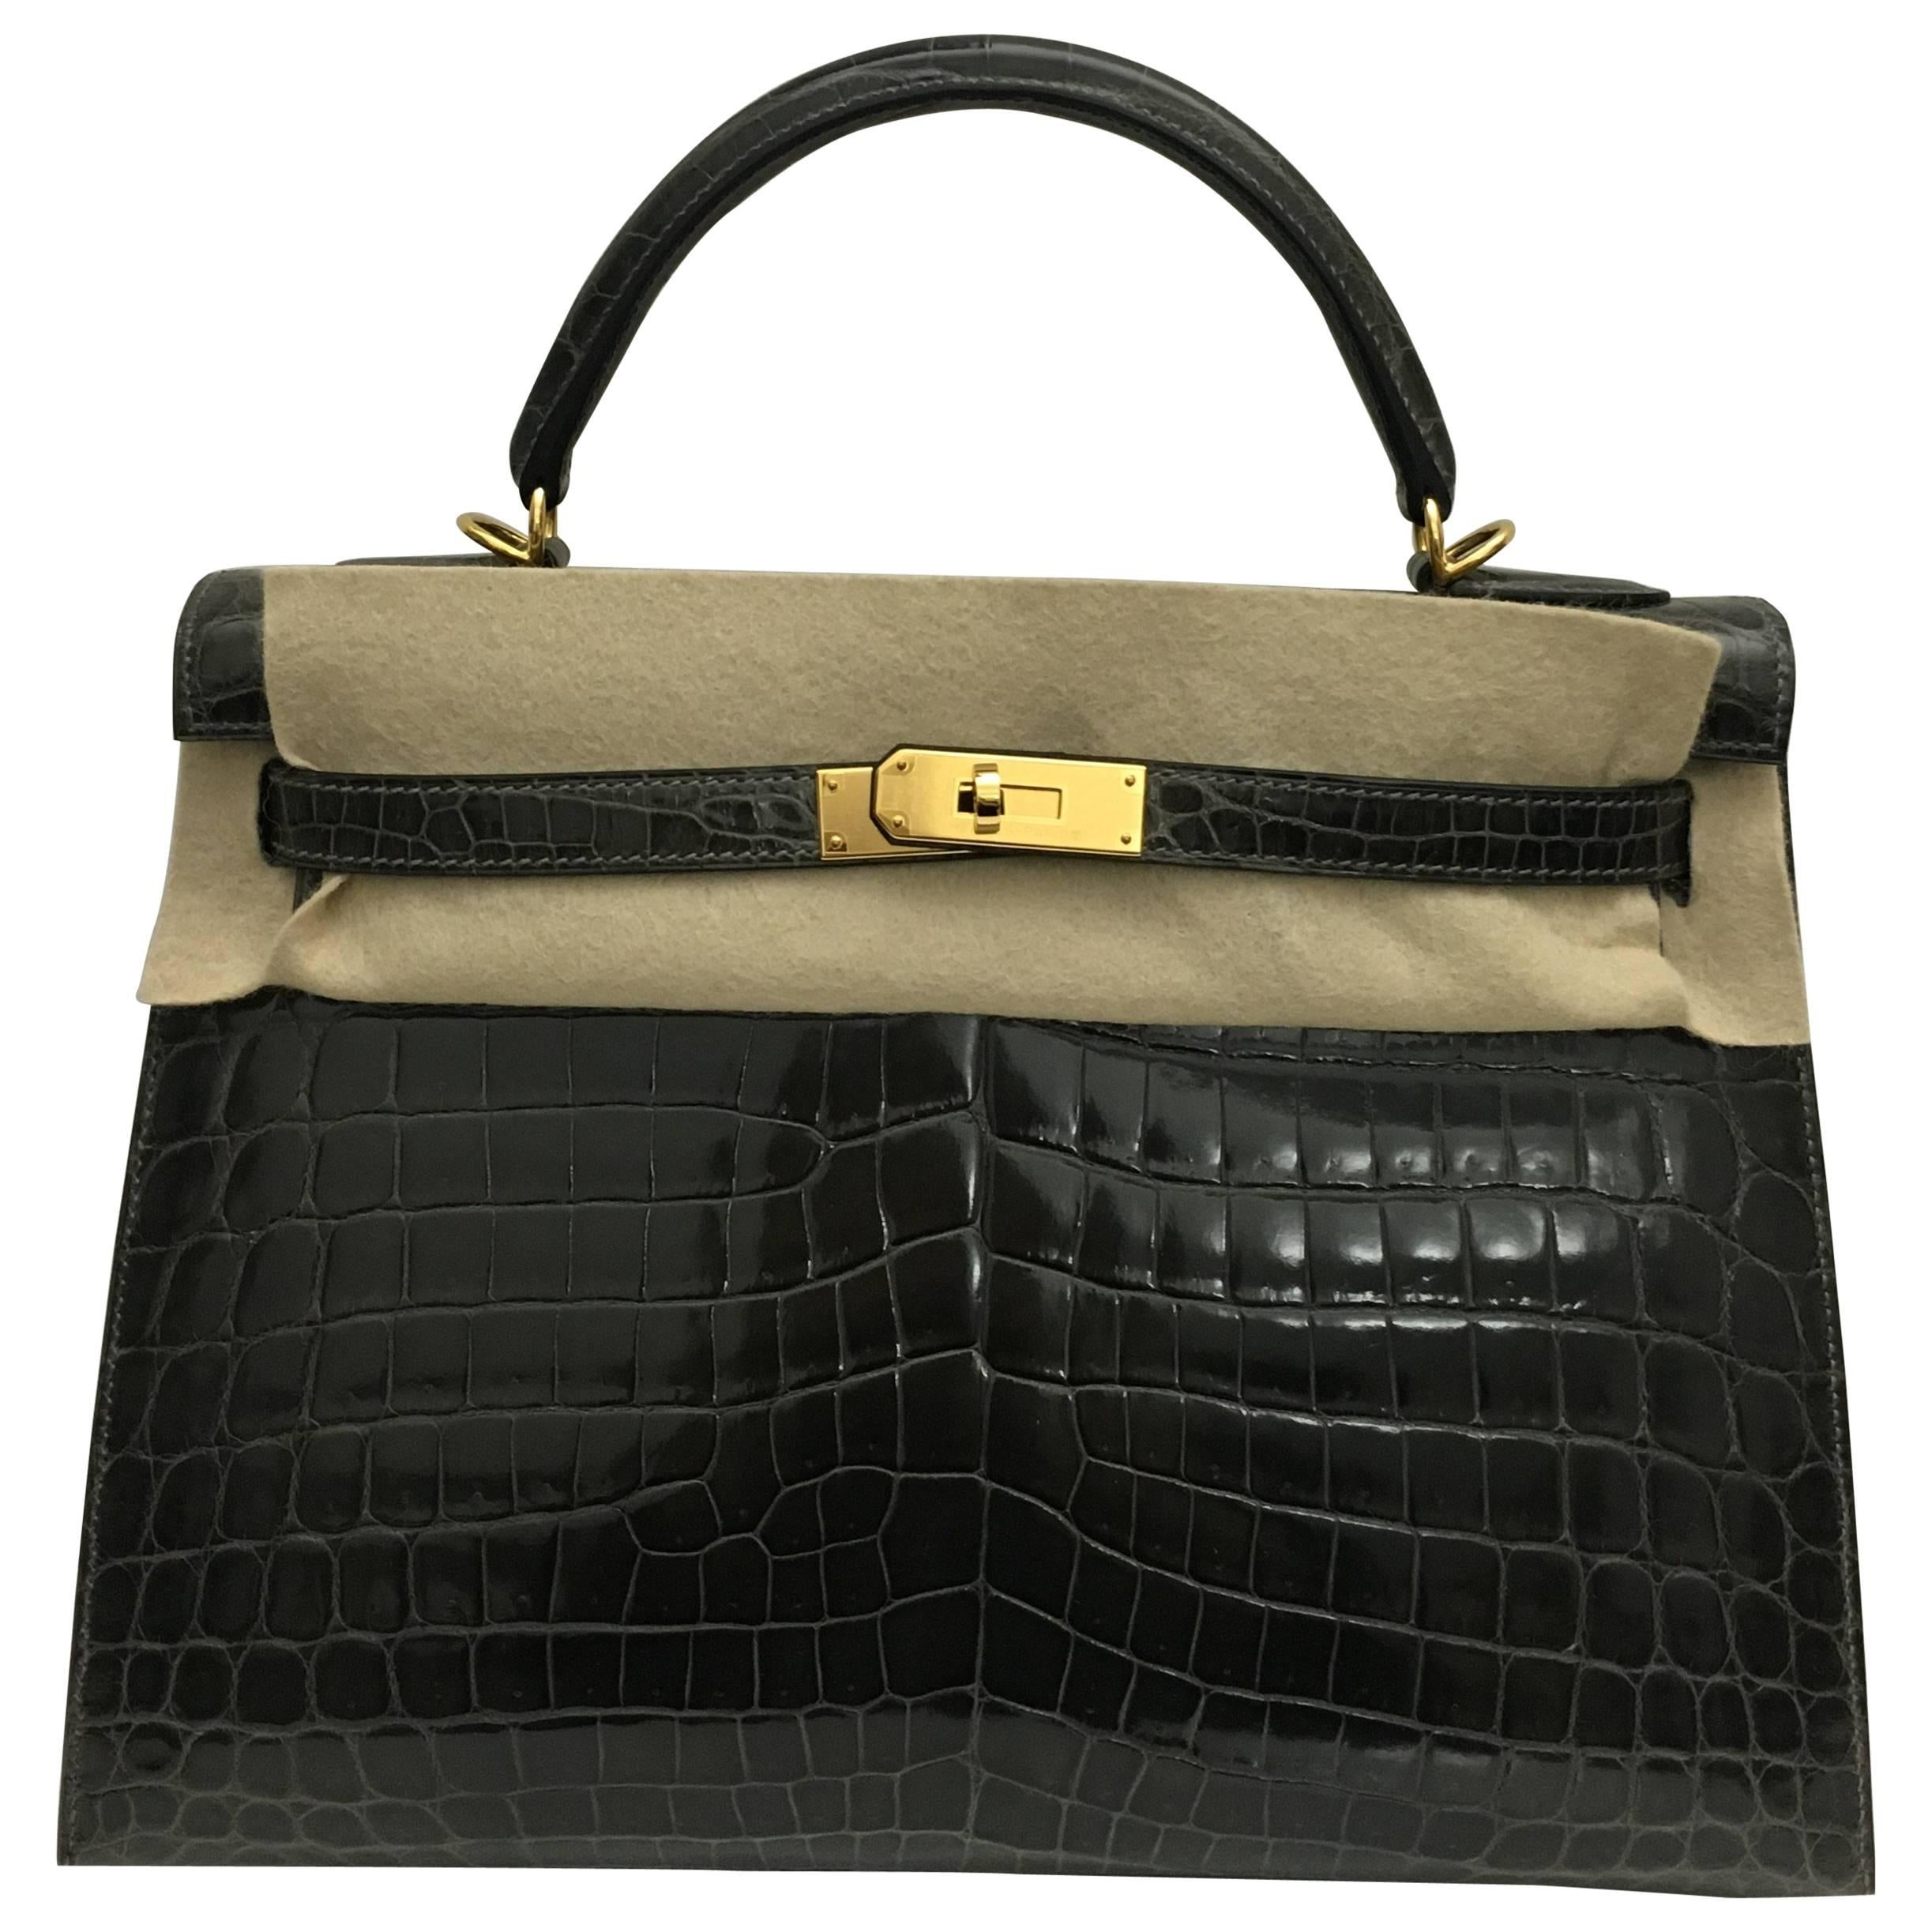 Brand New Hermes Kelly 32 Graphite Shiny Croc GHW For Sale